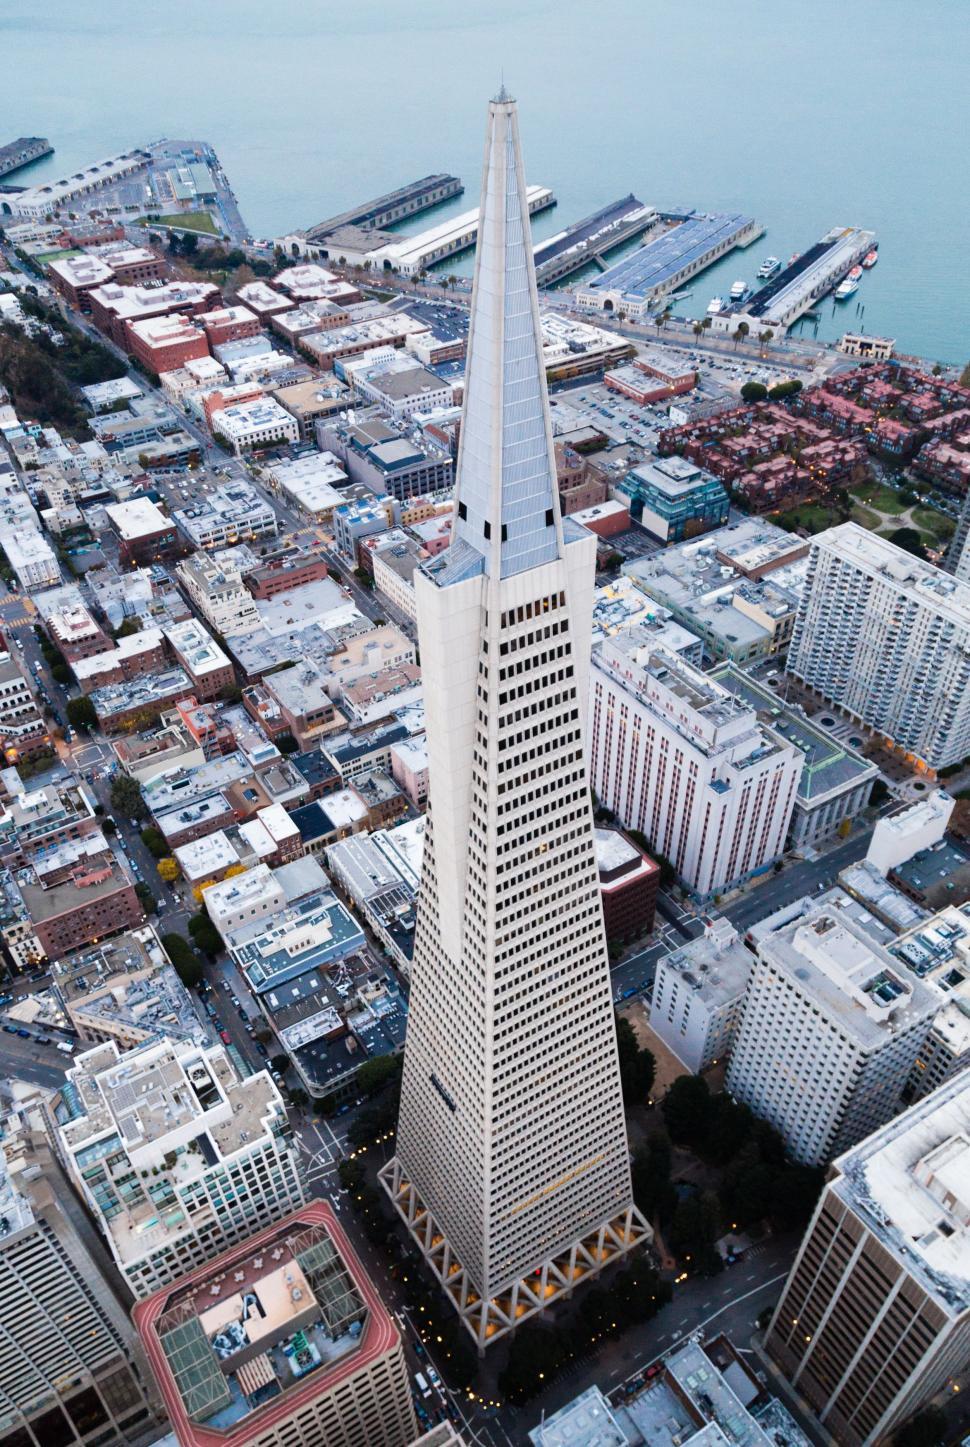 Free Image of Aerial View of a Tall Skyscraper in Urban Cityscape 